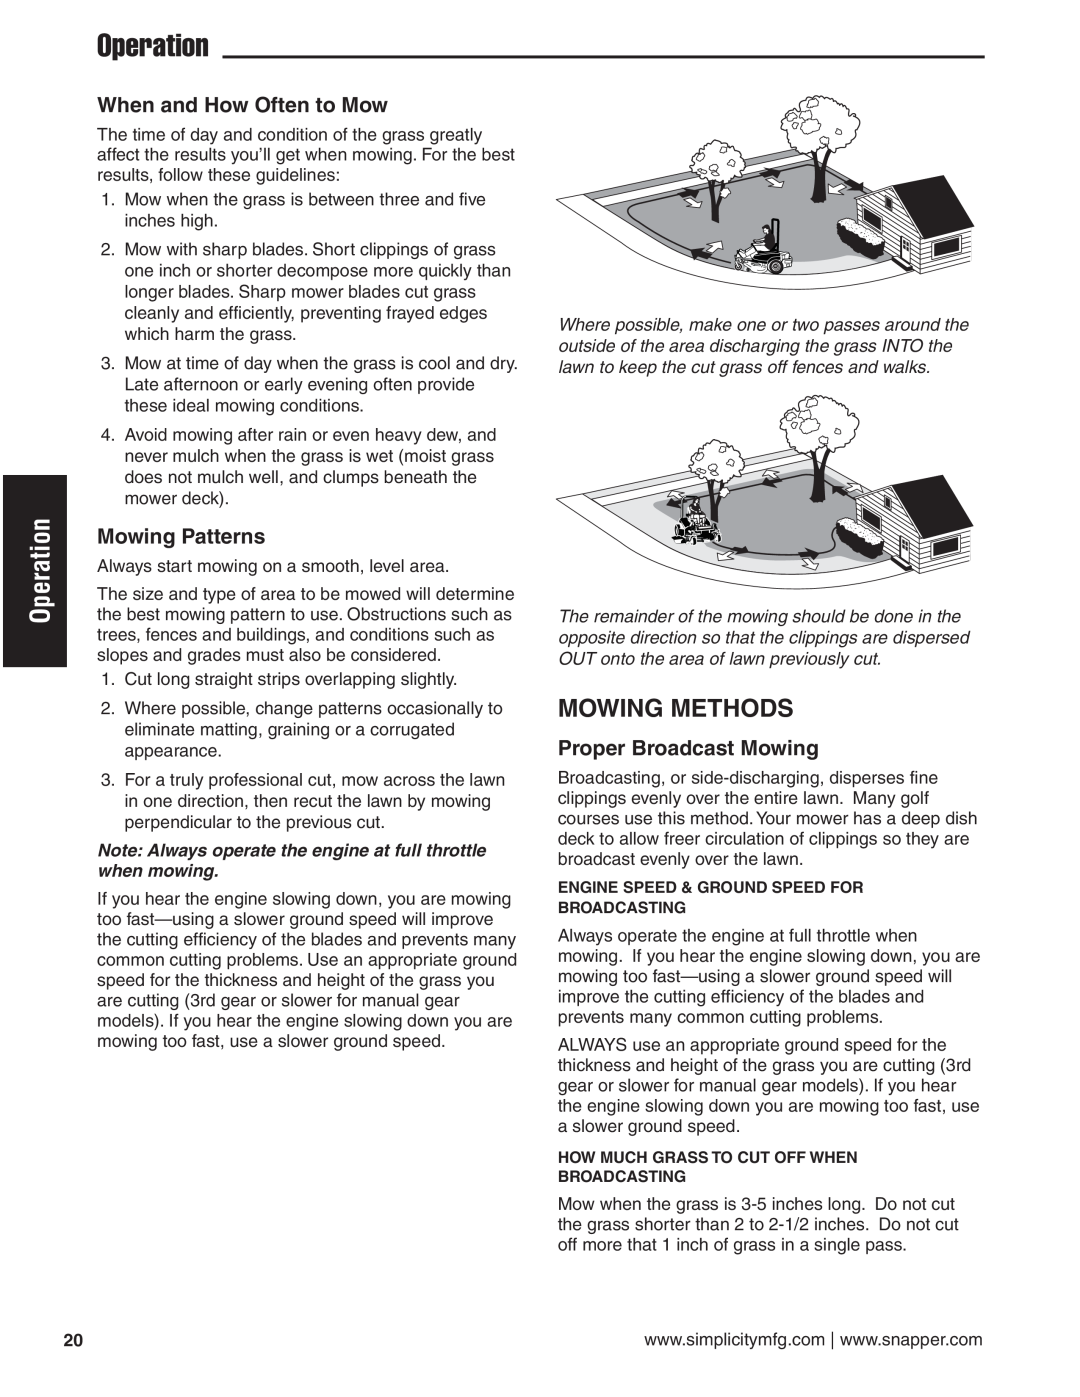 Simplicity 24HP manual Mowing Methods, Operation, When and How Often to Mow, Mowing Patterns, Proper Broadcast Mowing 